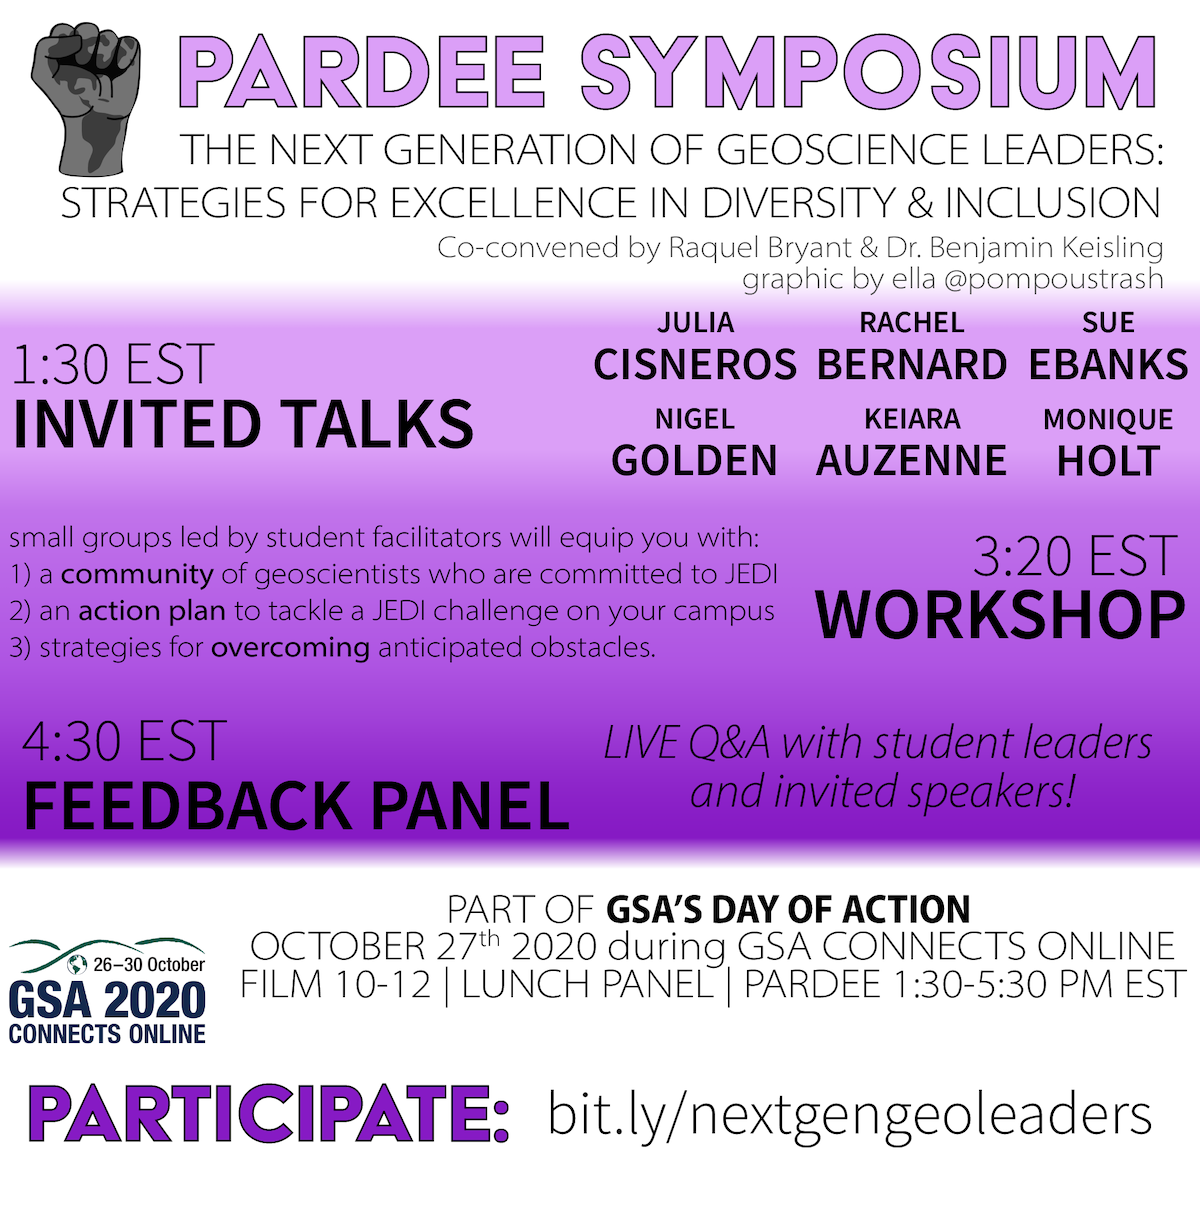 Official poster for the Pardee Symposium: The Next Generation of Geoscience Leaders: Strategies for Excellence in Diversity & Inclusion. The fist graphic on the flyer was designed by artist Ella Halpine (@pompoustrash) in 2017.